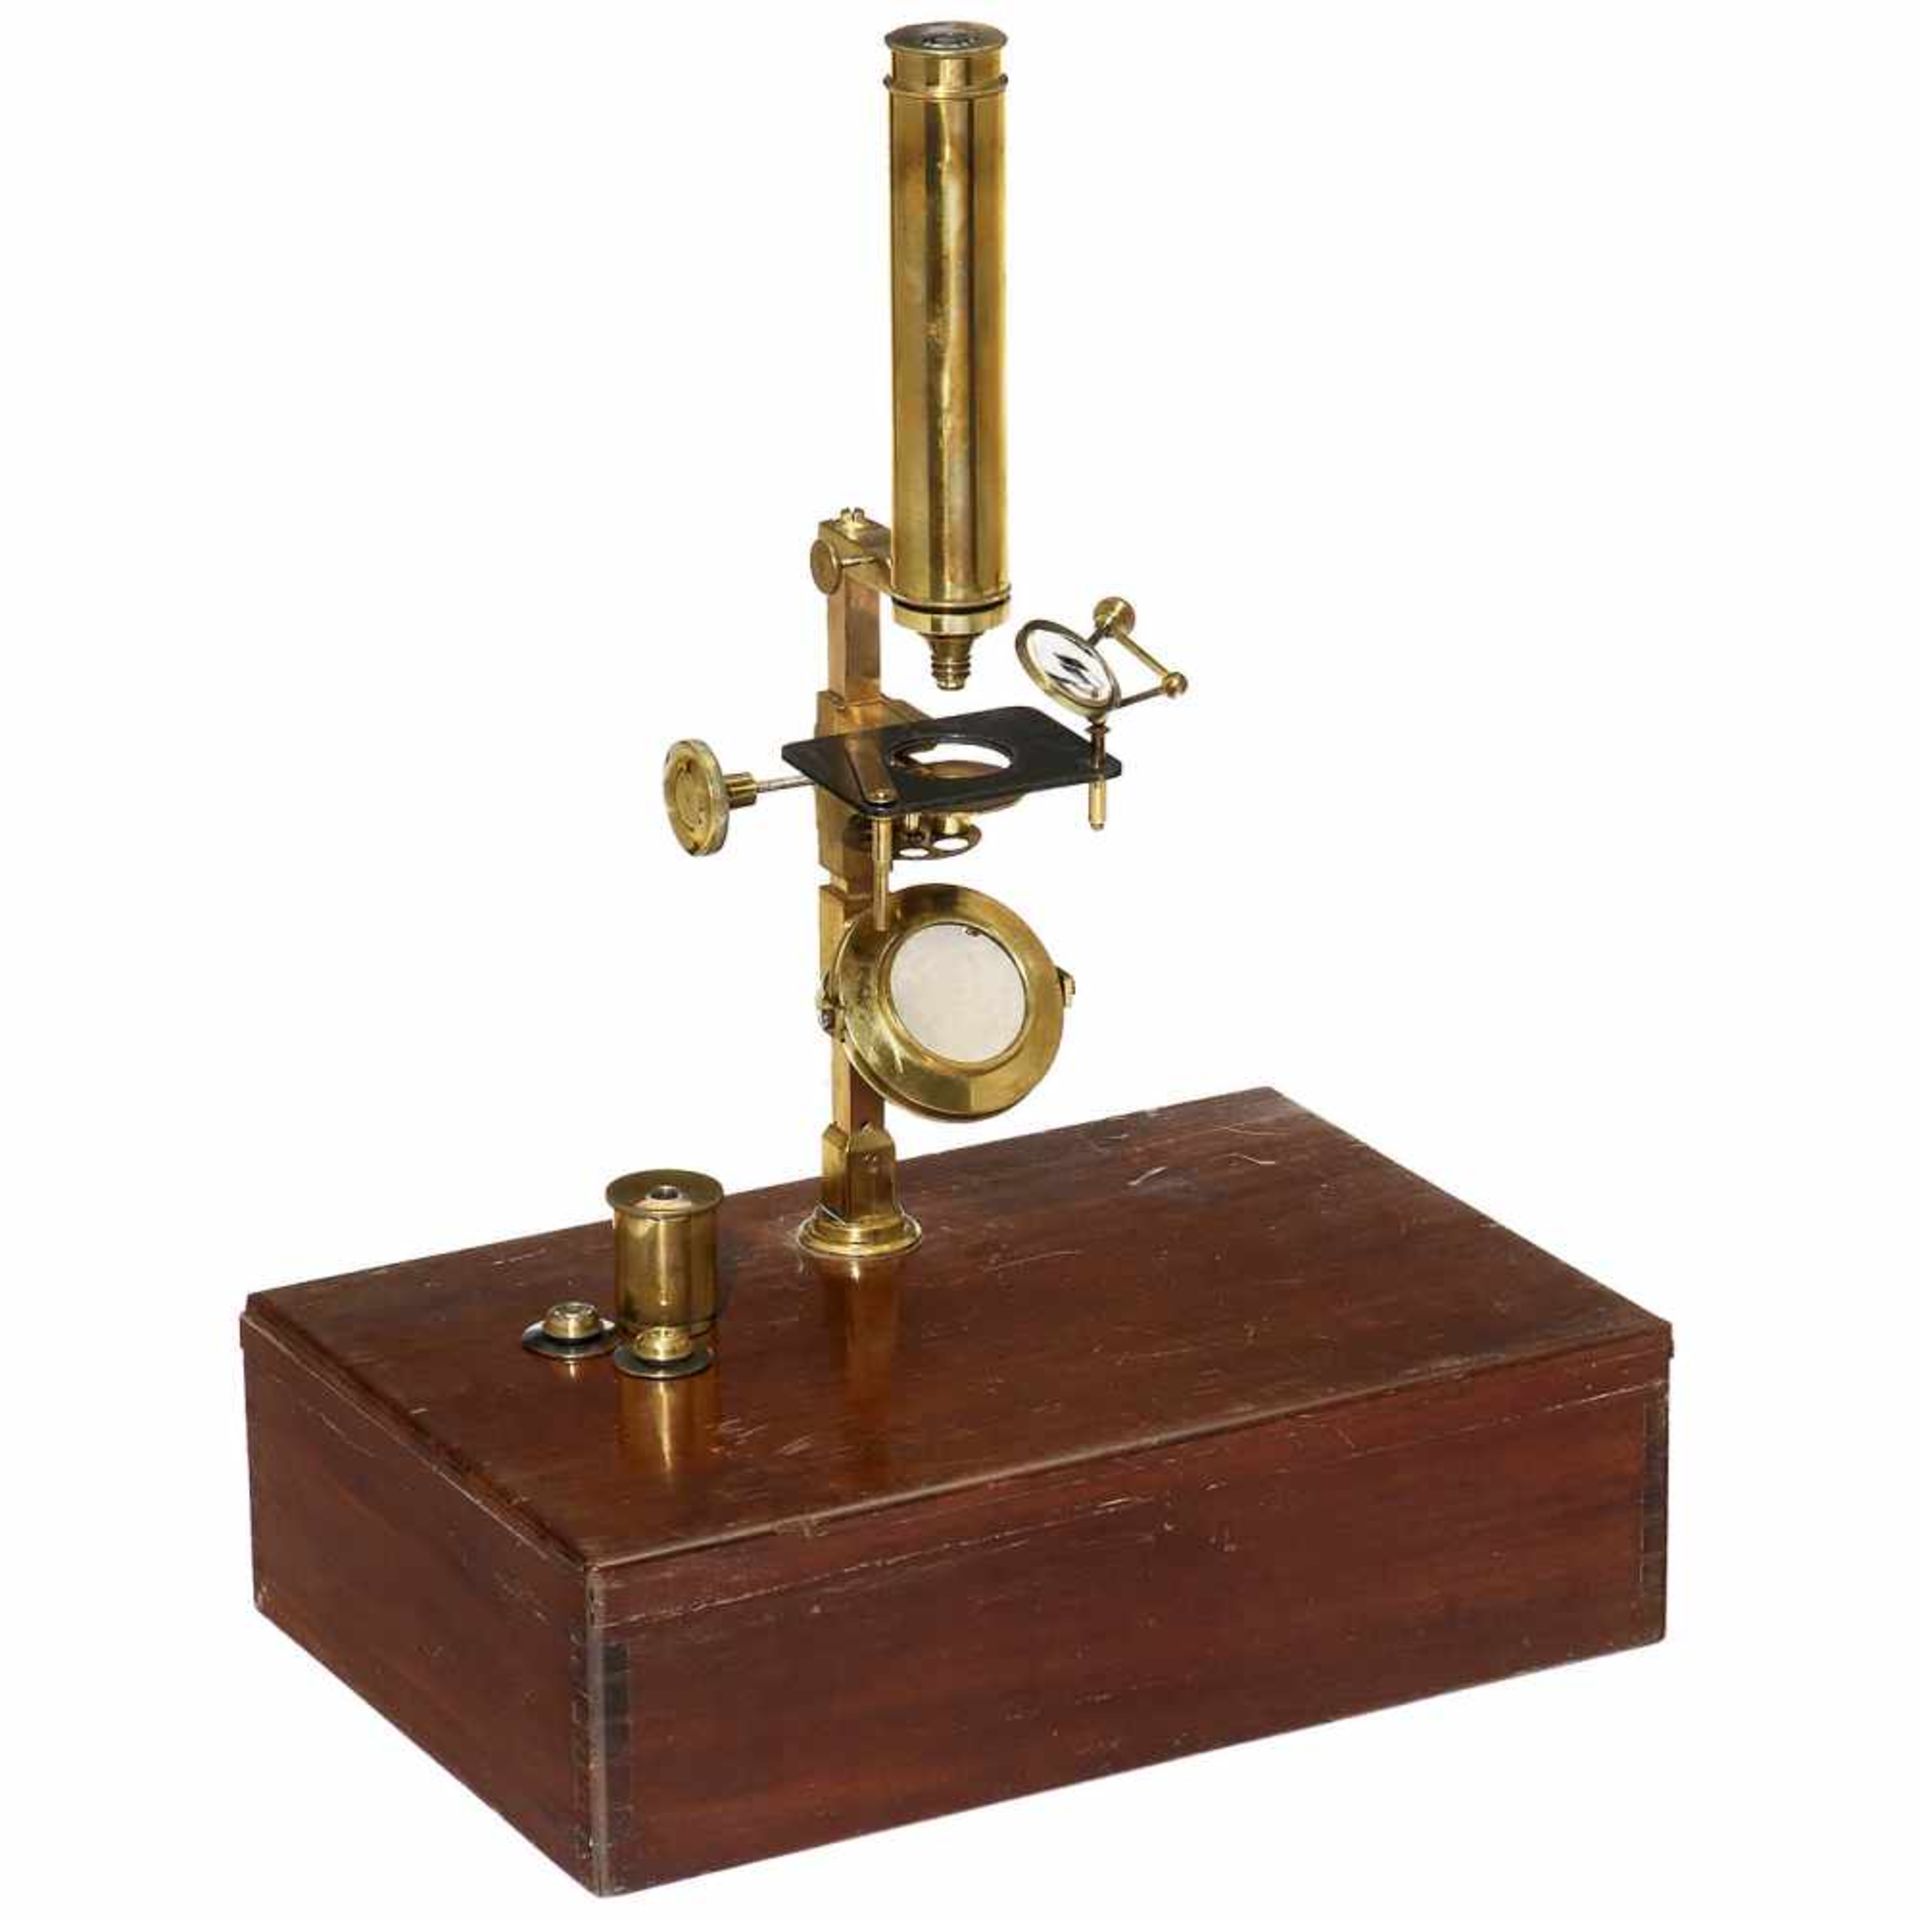 Early French Compound Microscope by Chevalier, c. 1850Signed on the tube: "Charles Chevalier,